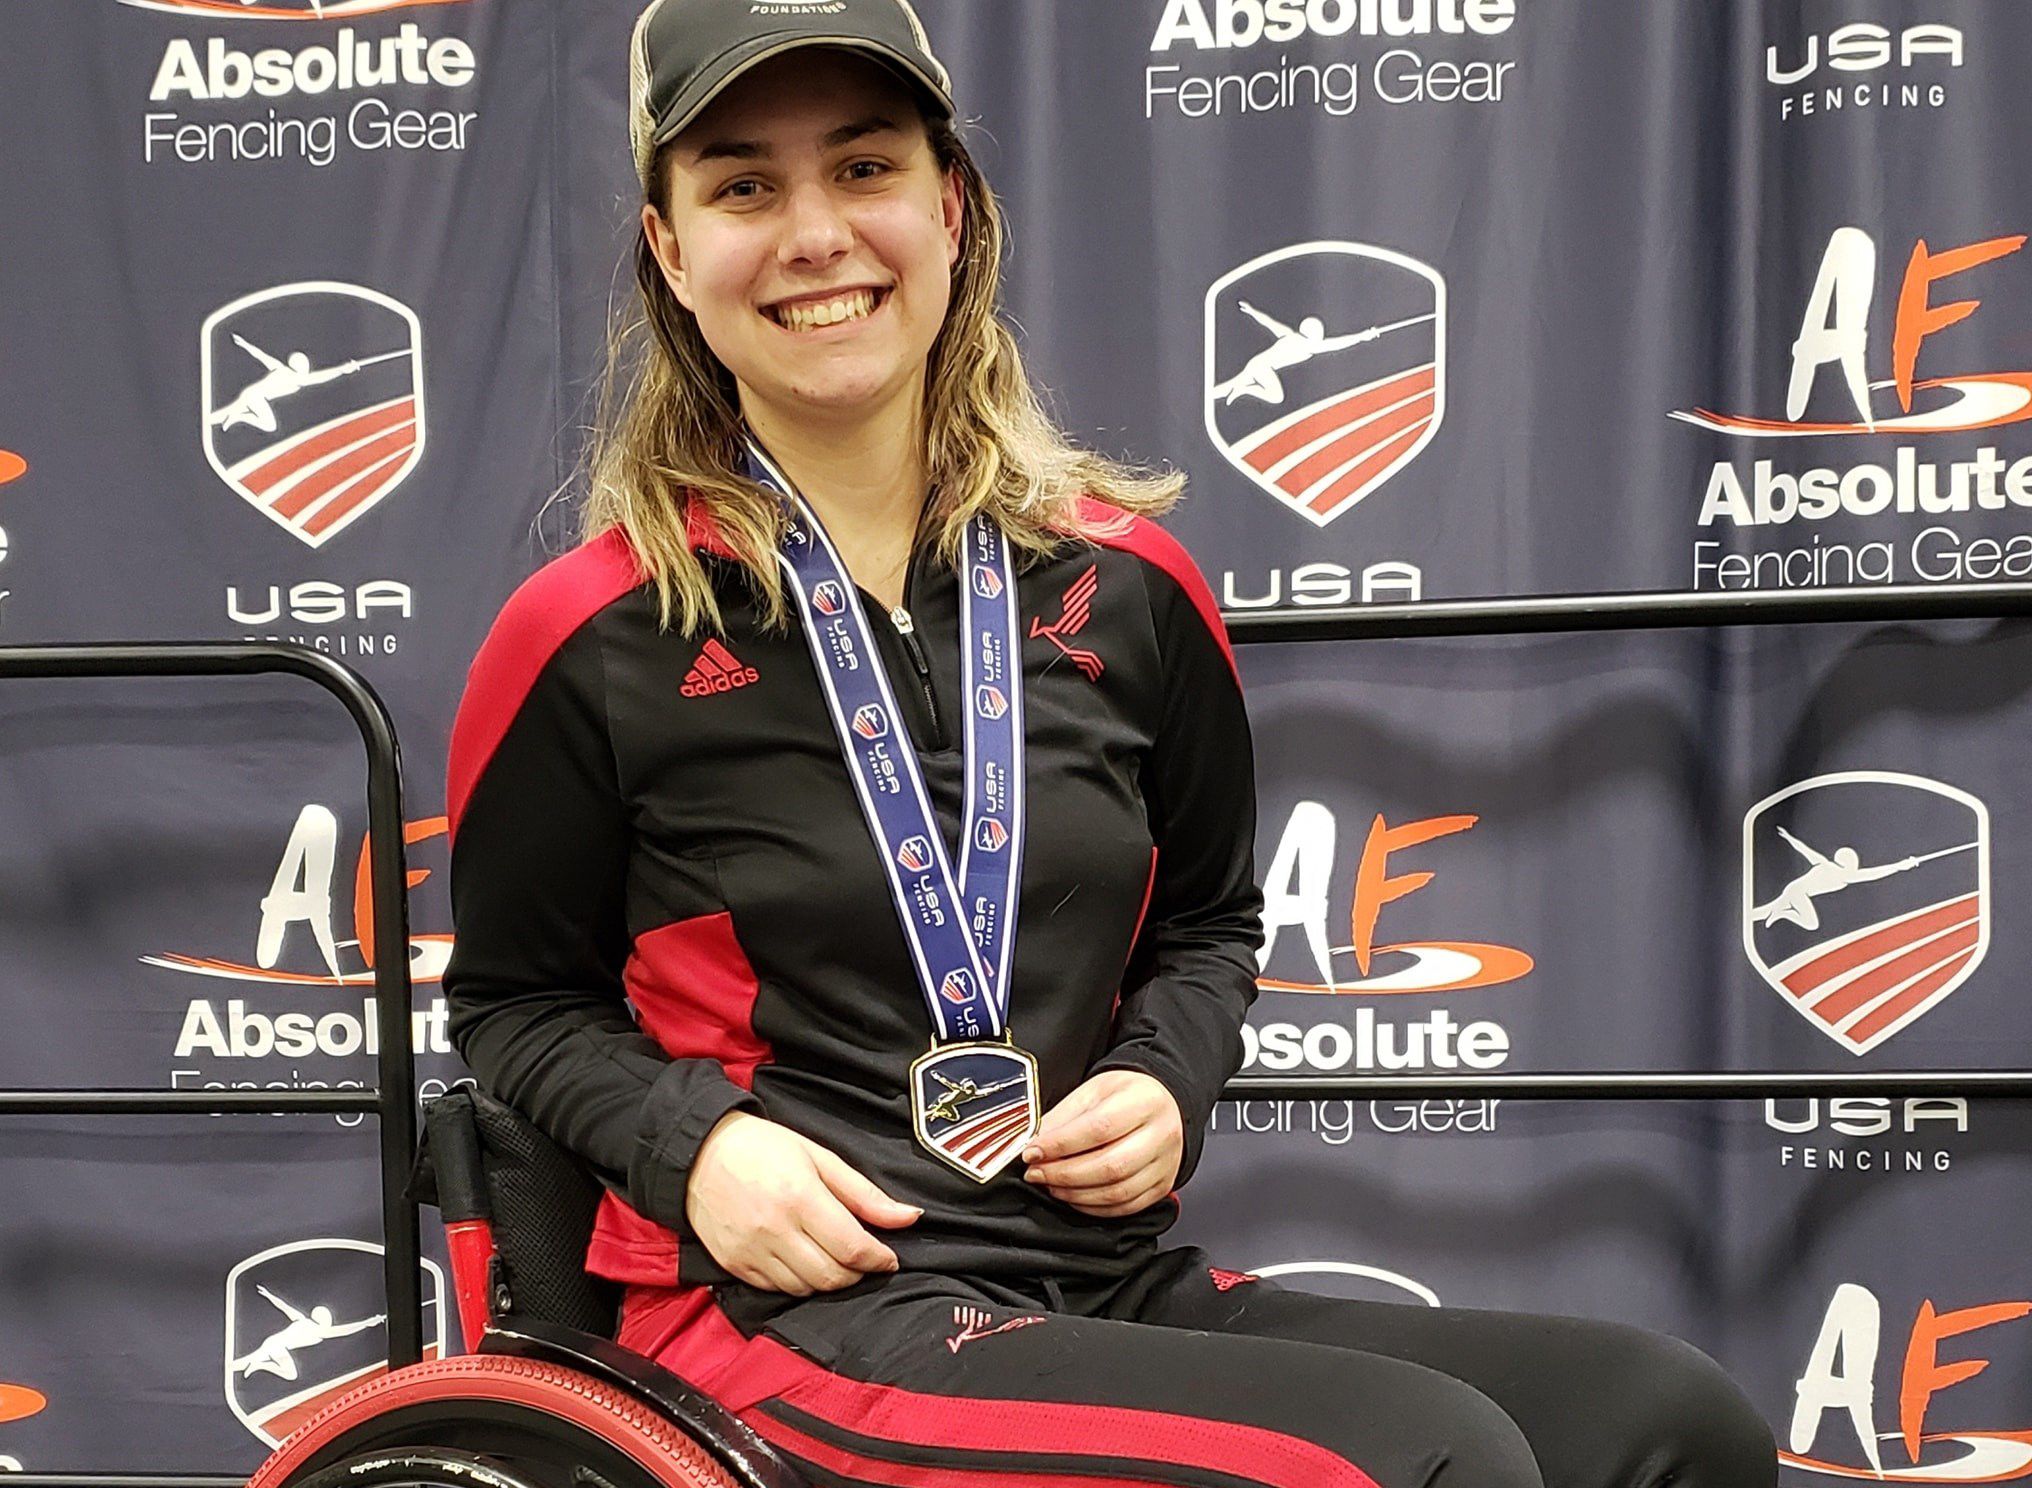 Victoria placed first place at the North America Championships in January 2020. Image courtesy of Victoria Isaacson. United States, 2020.